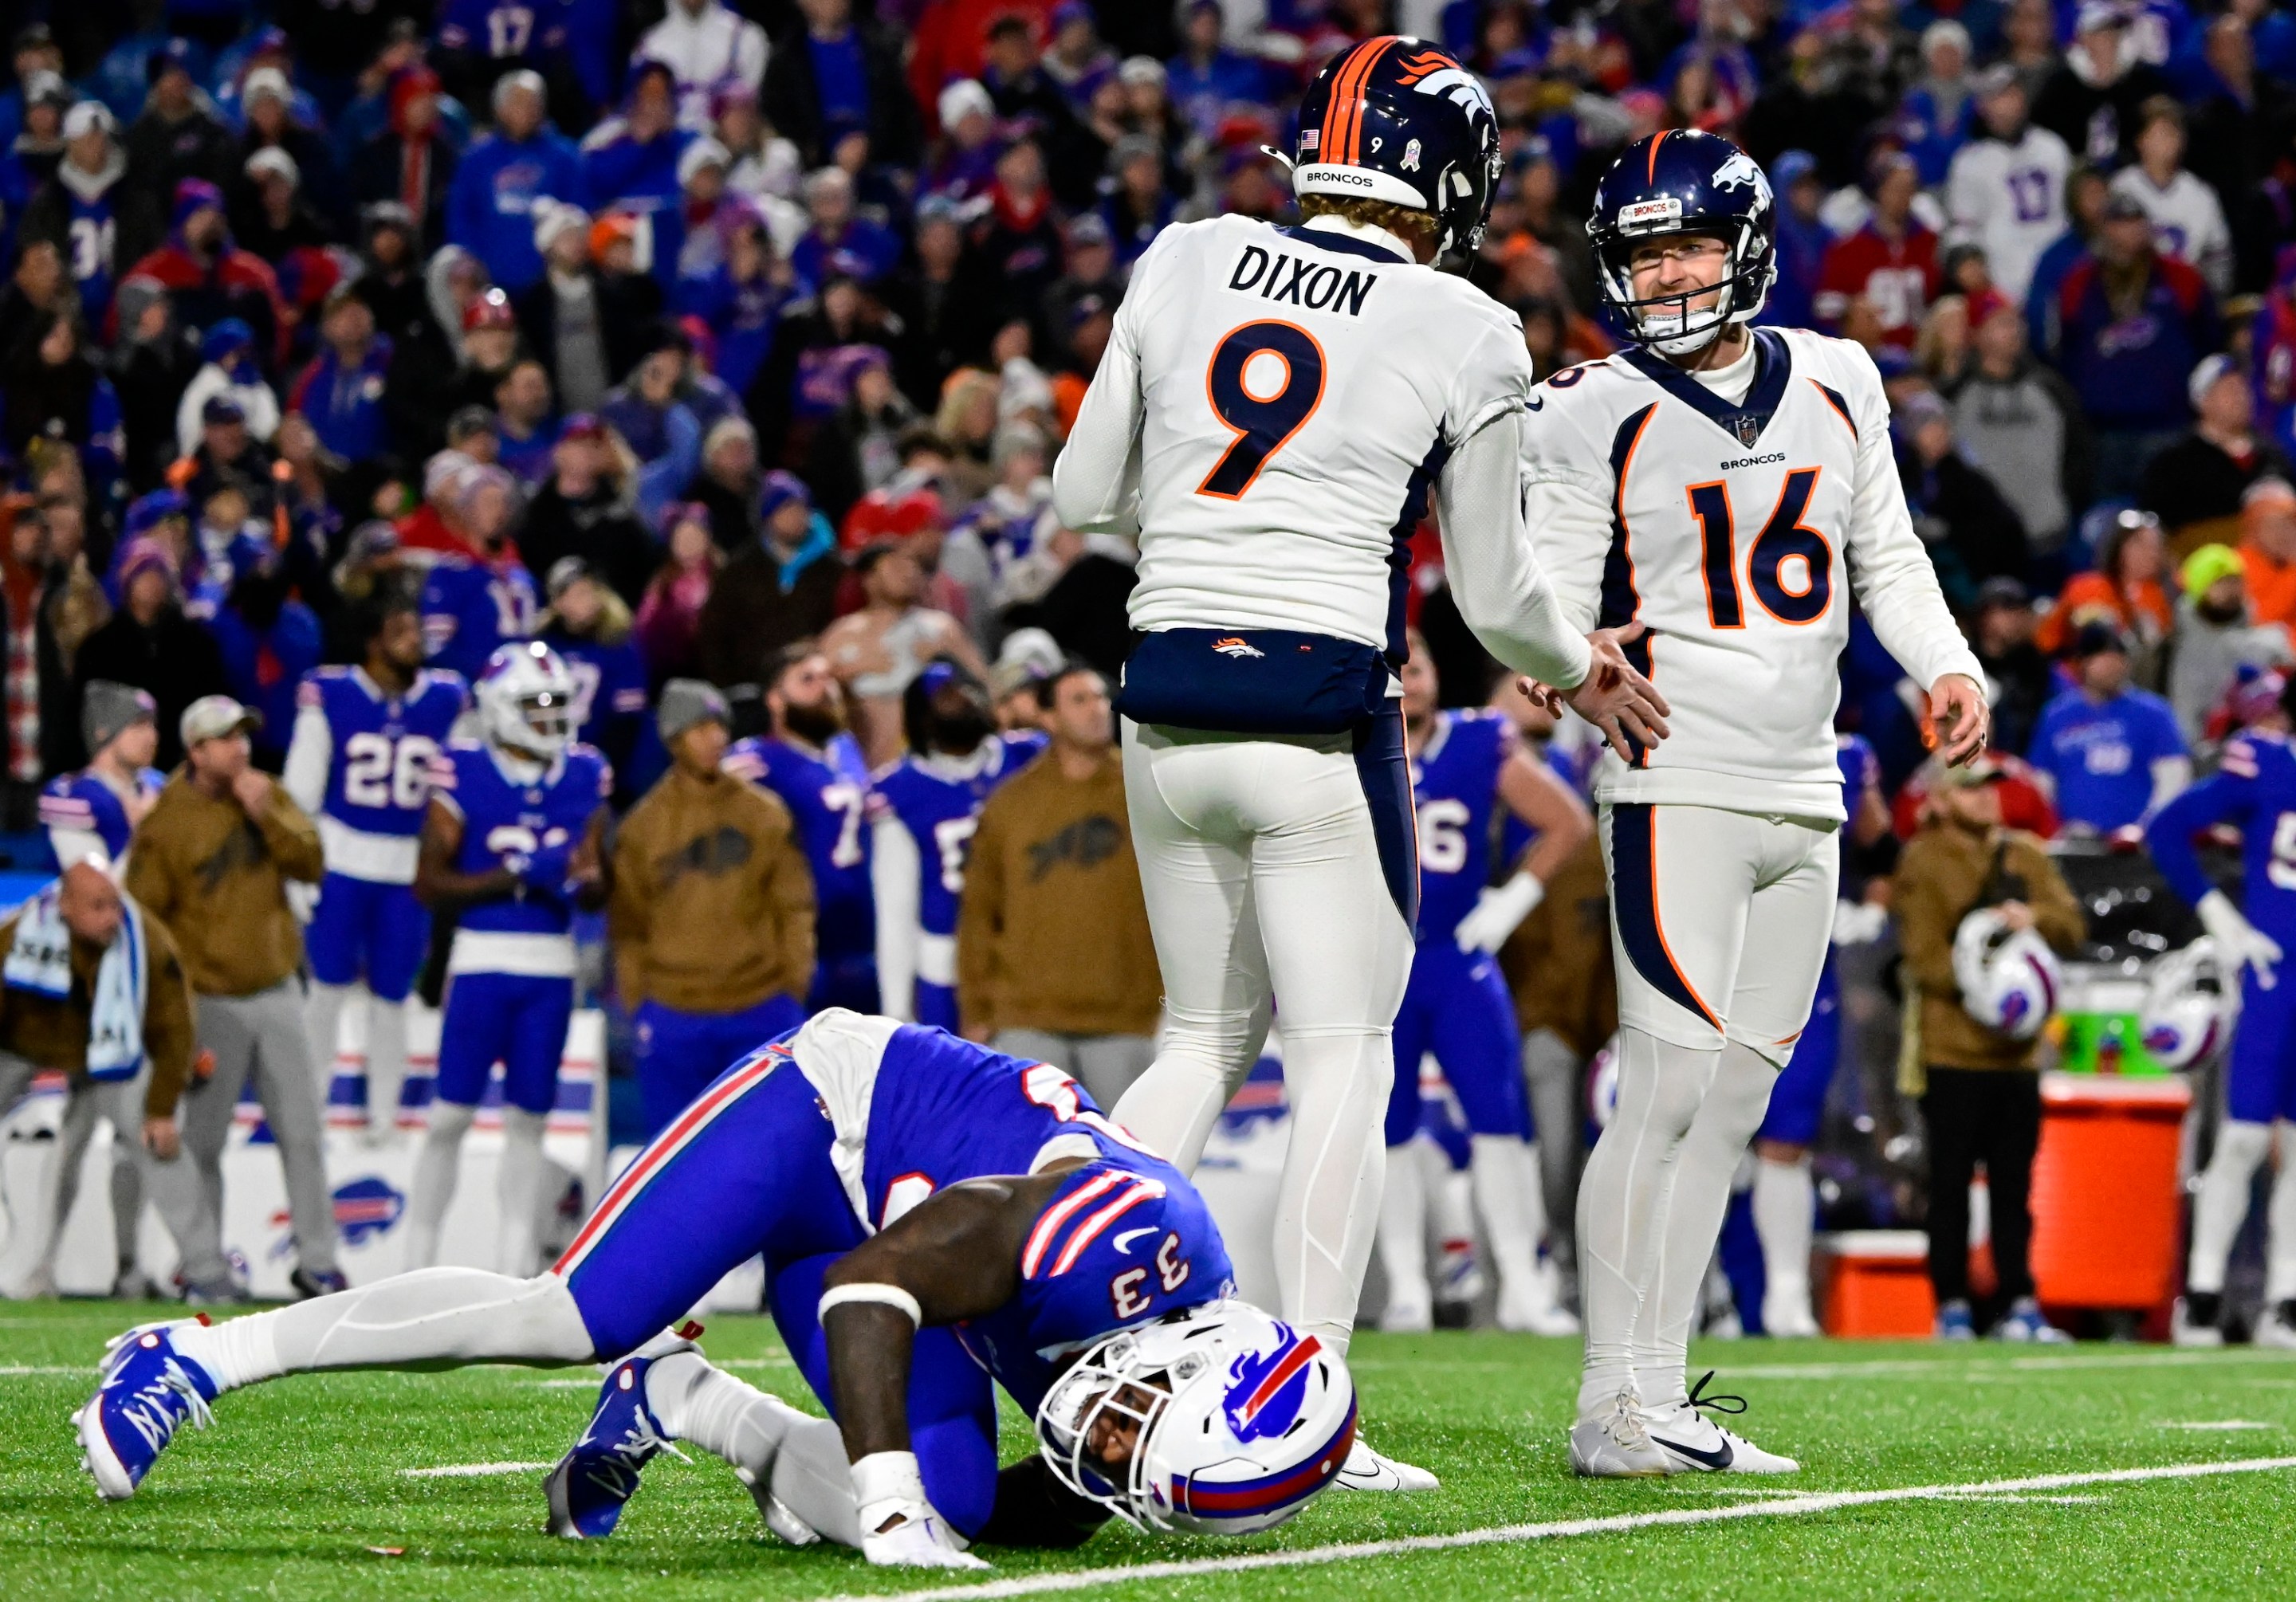 ORCHARD PARK, NY - NOVEMBER 13: Denver Broncos punter Riley Dixon (9) celebrates with place kicker Wil Lutz (16) who kicked the winning field goal against the Buffalo Bills in the fourth quarter at Highmark Stadium November 13, 2023. Buffalo Bills cornerback Siran Neal (33) moments after the kick, The Broncos won 24-22. (Photo by Andy Cross/The Denver Post)